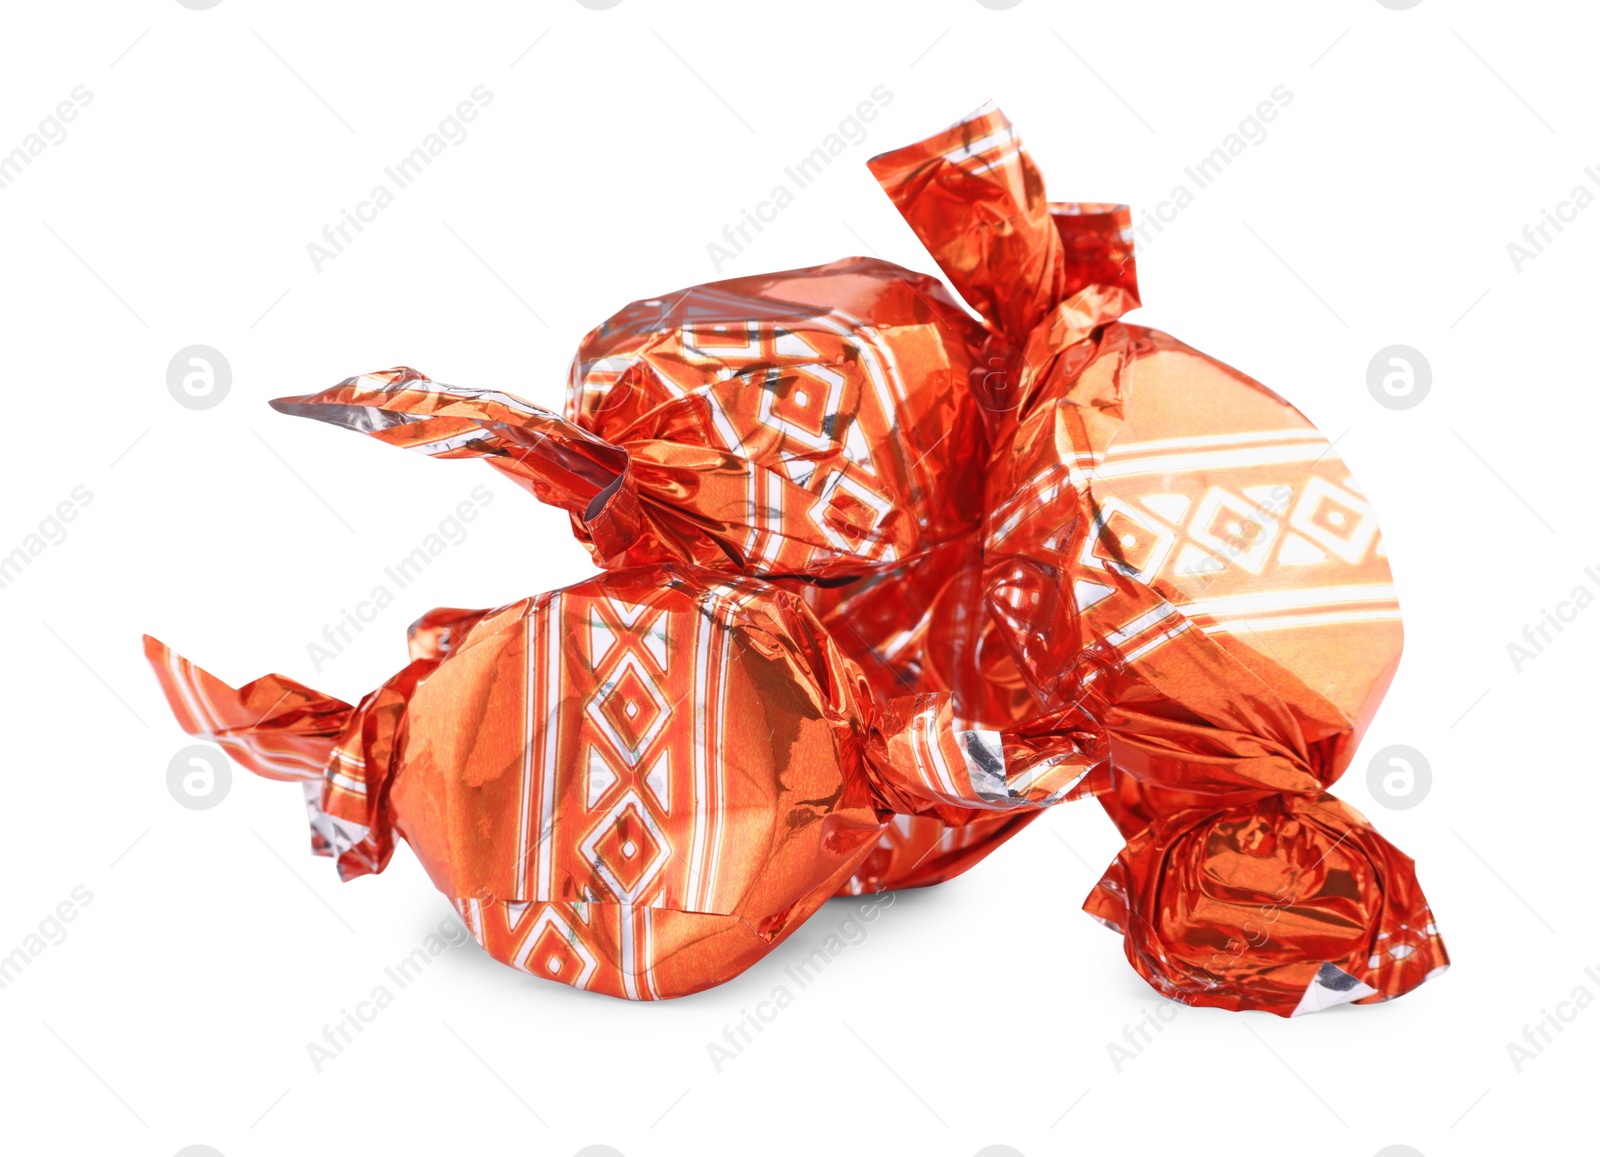 Photo of Candies in orange wrappers isolated on white